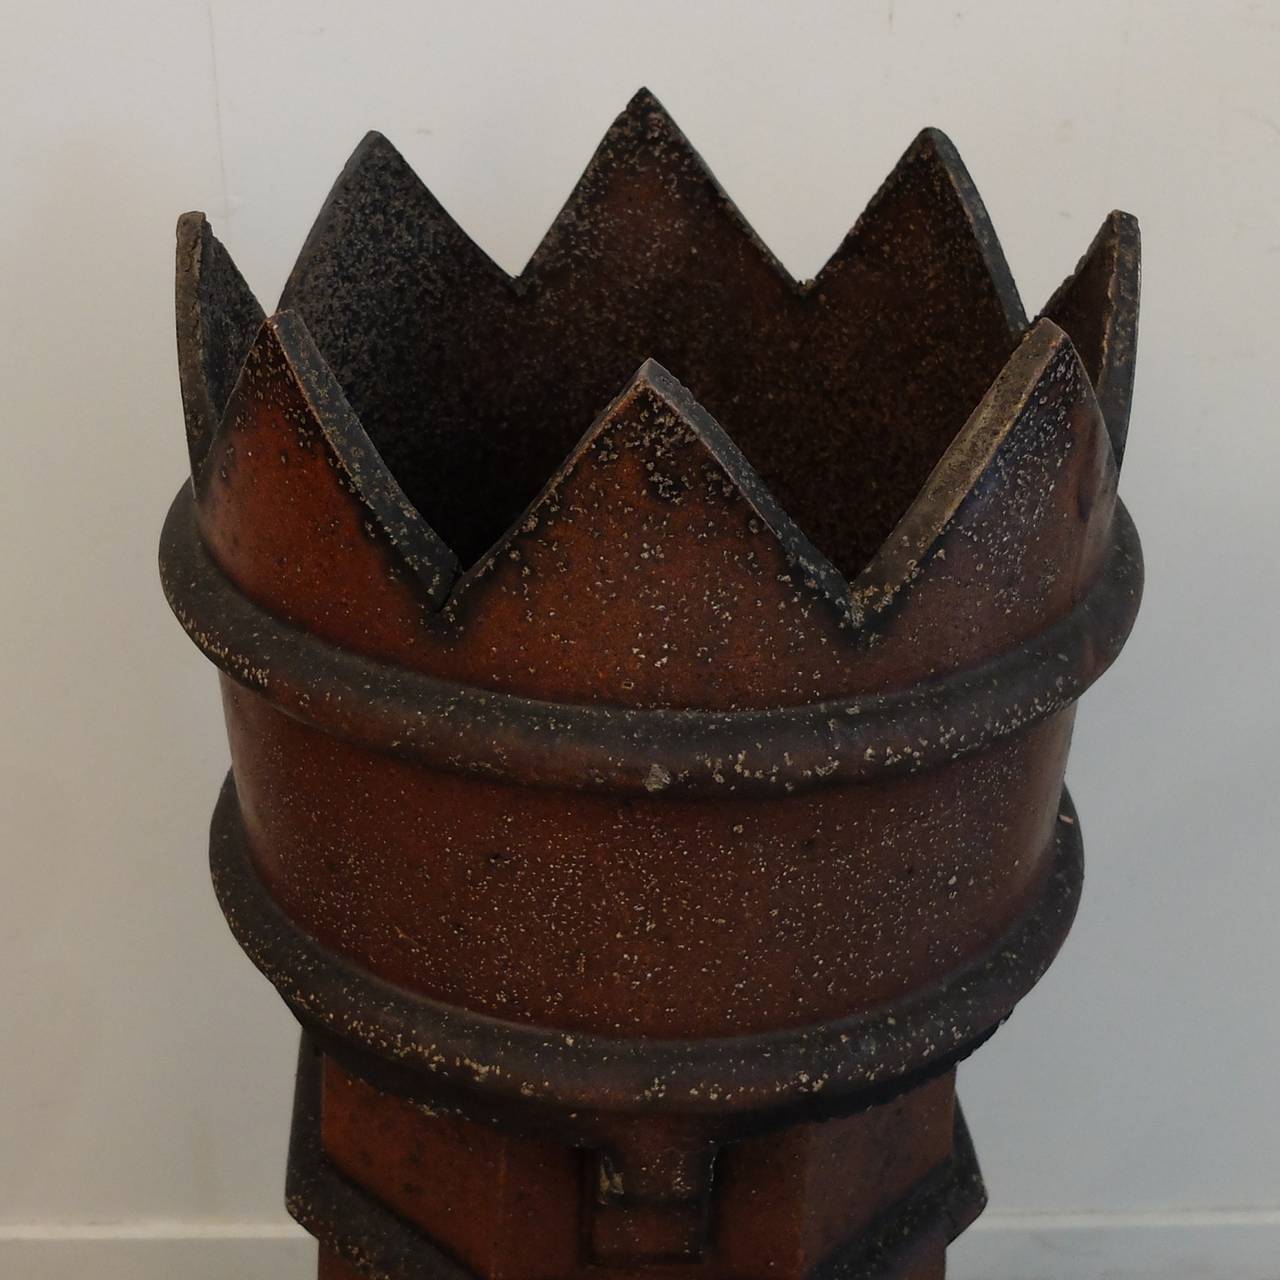 Glazed terracotta king chimney pot of Classic tapered octagonal form, with a 'king' top - pointed tips, as opposed to a 'queen' which has rounded tips.